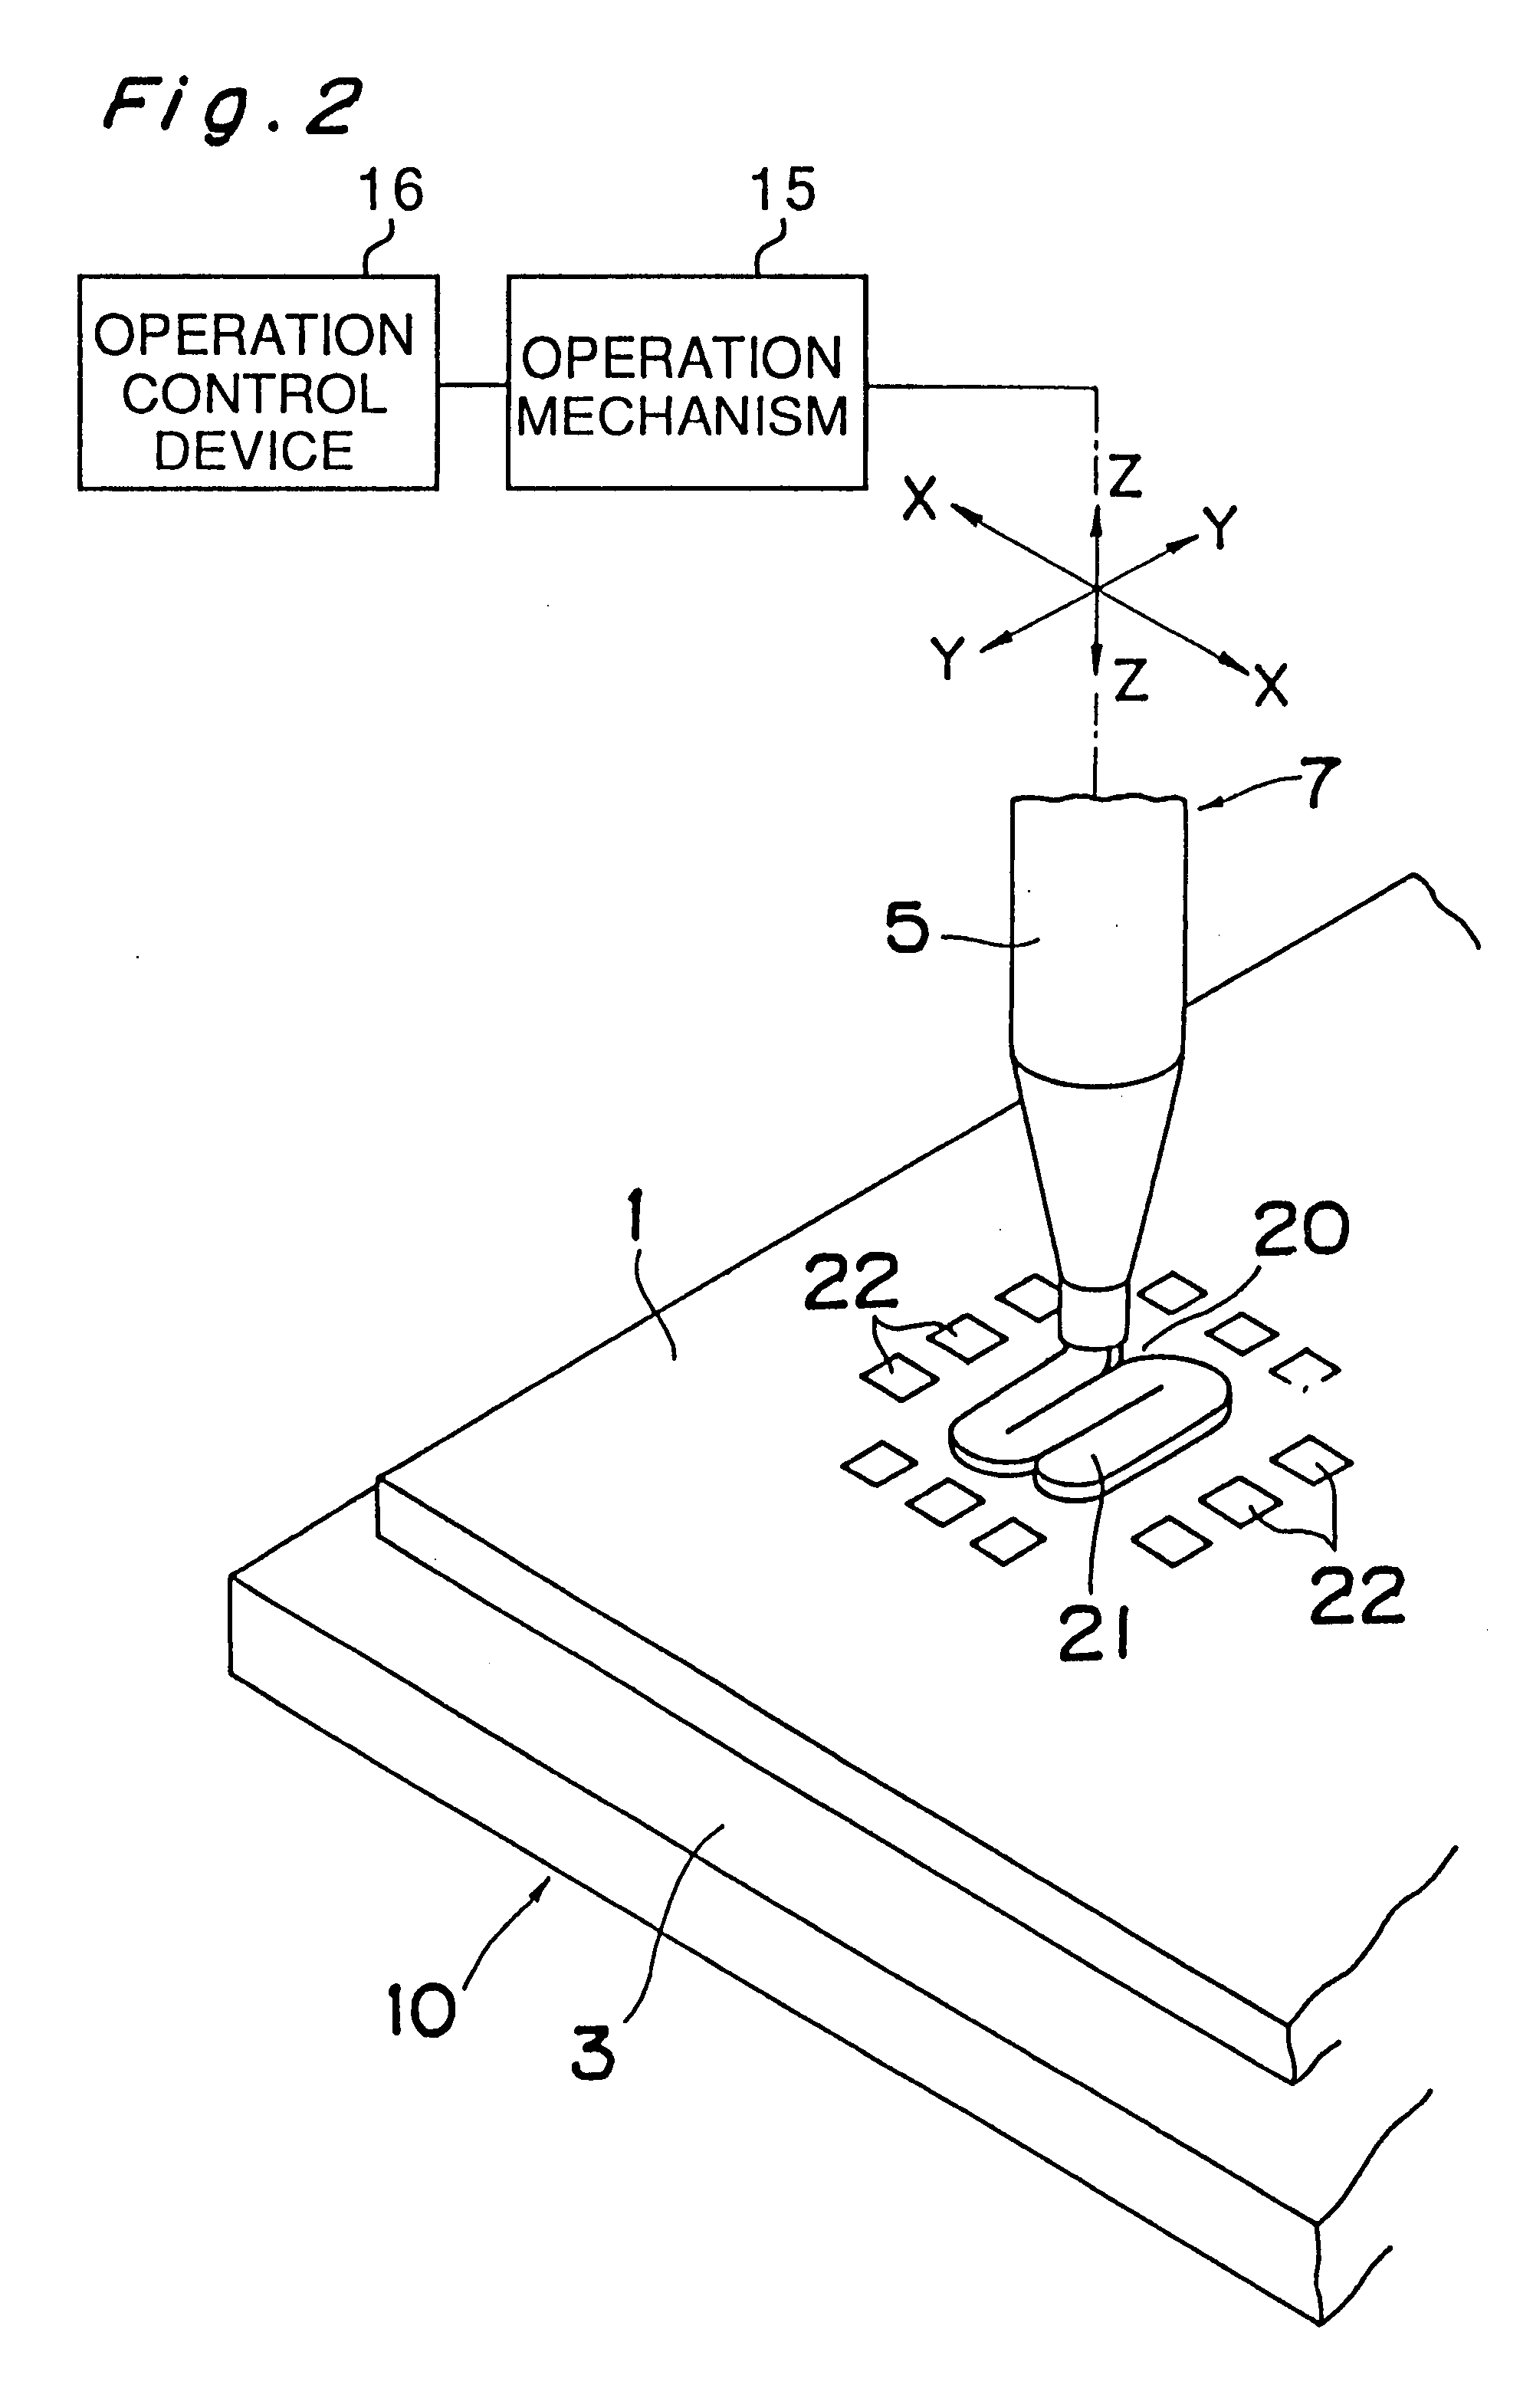 Apparatus for mounting an electronic component